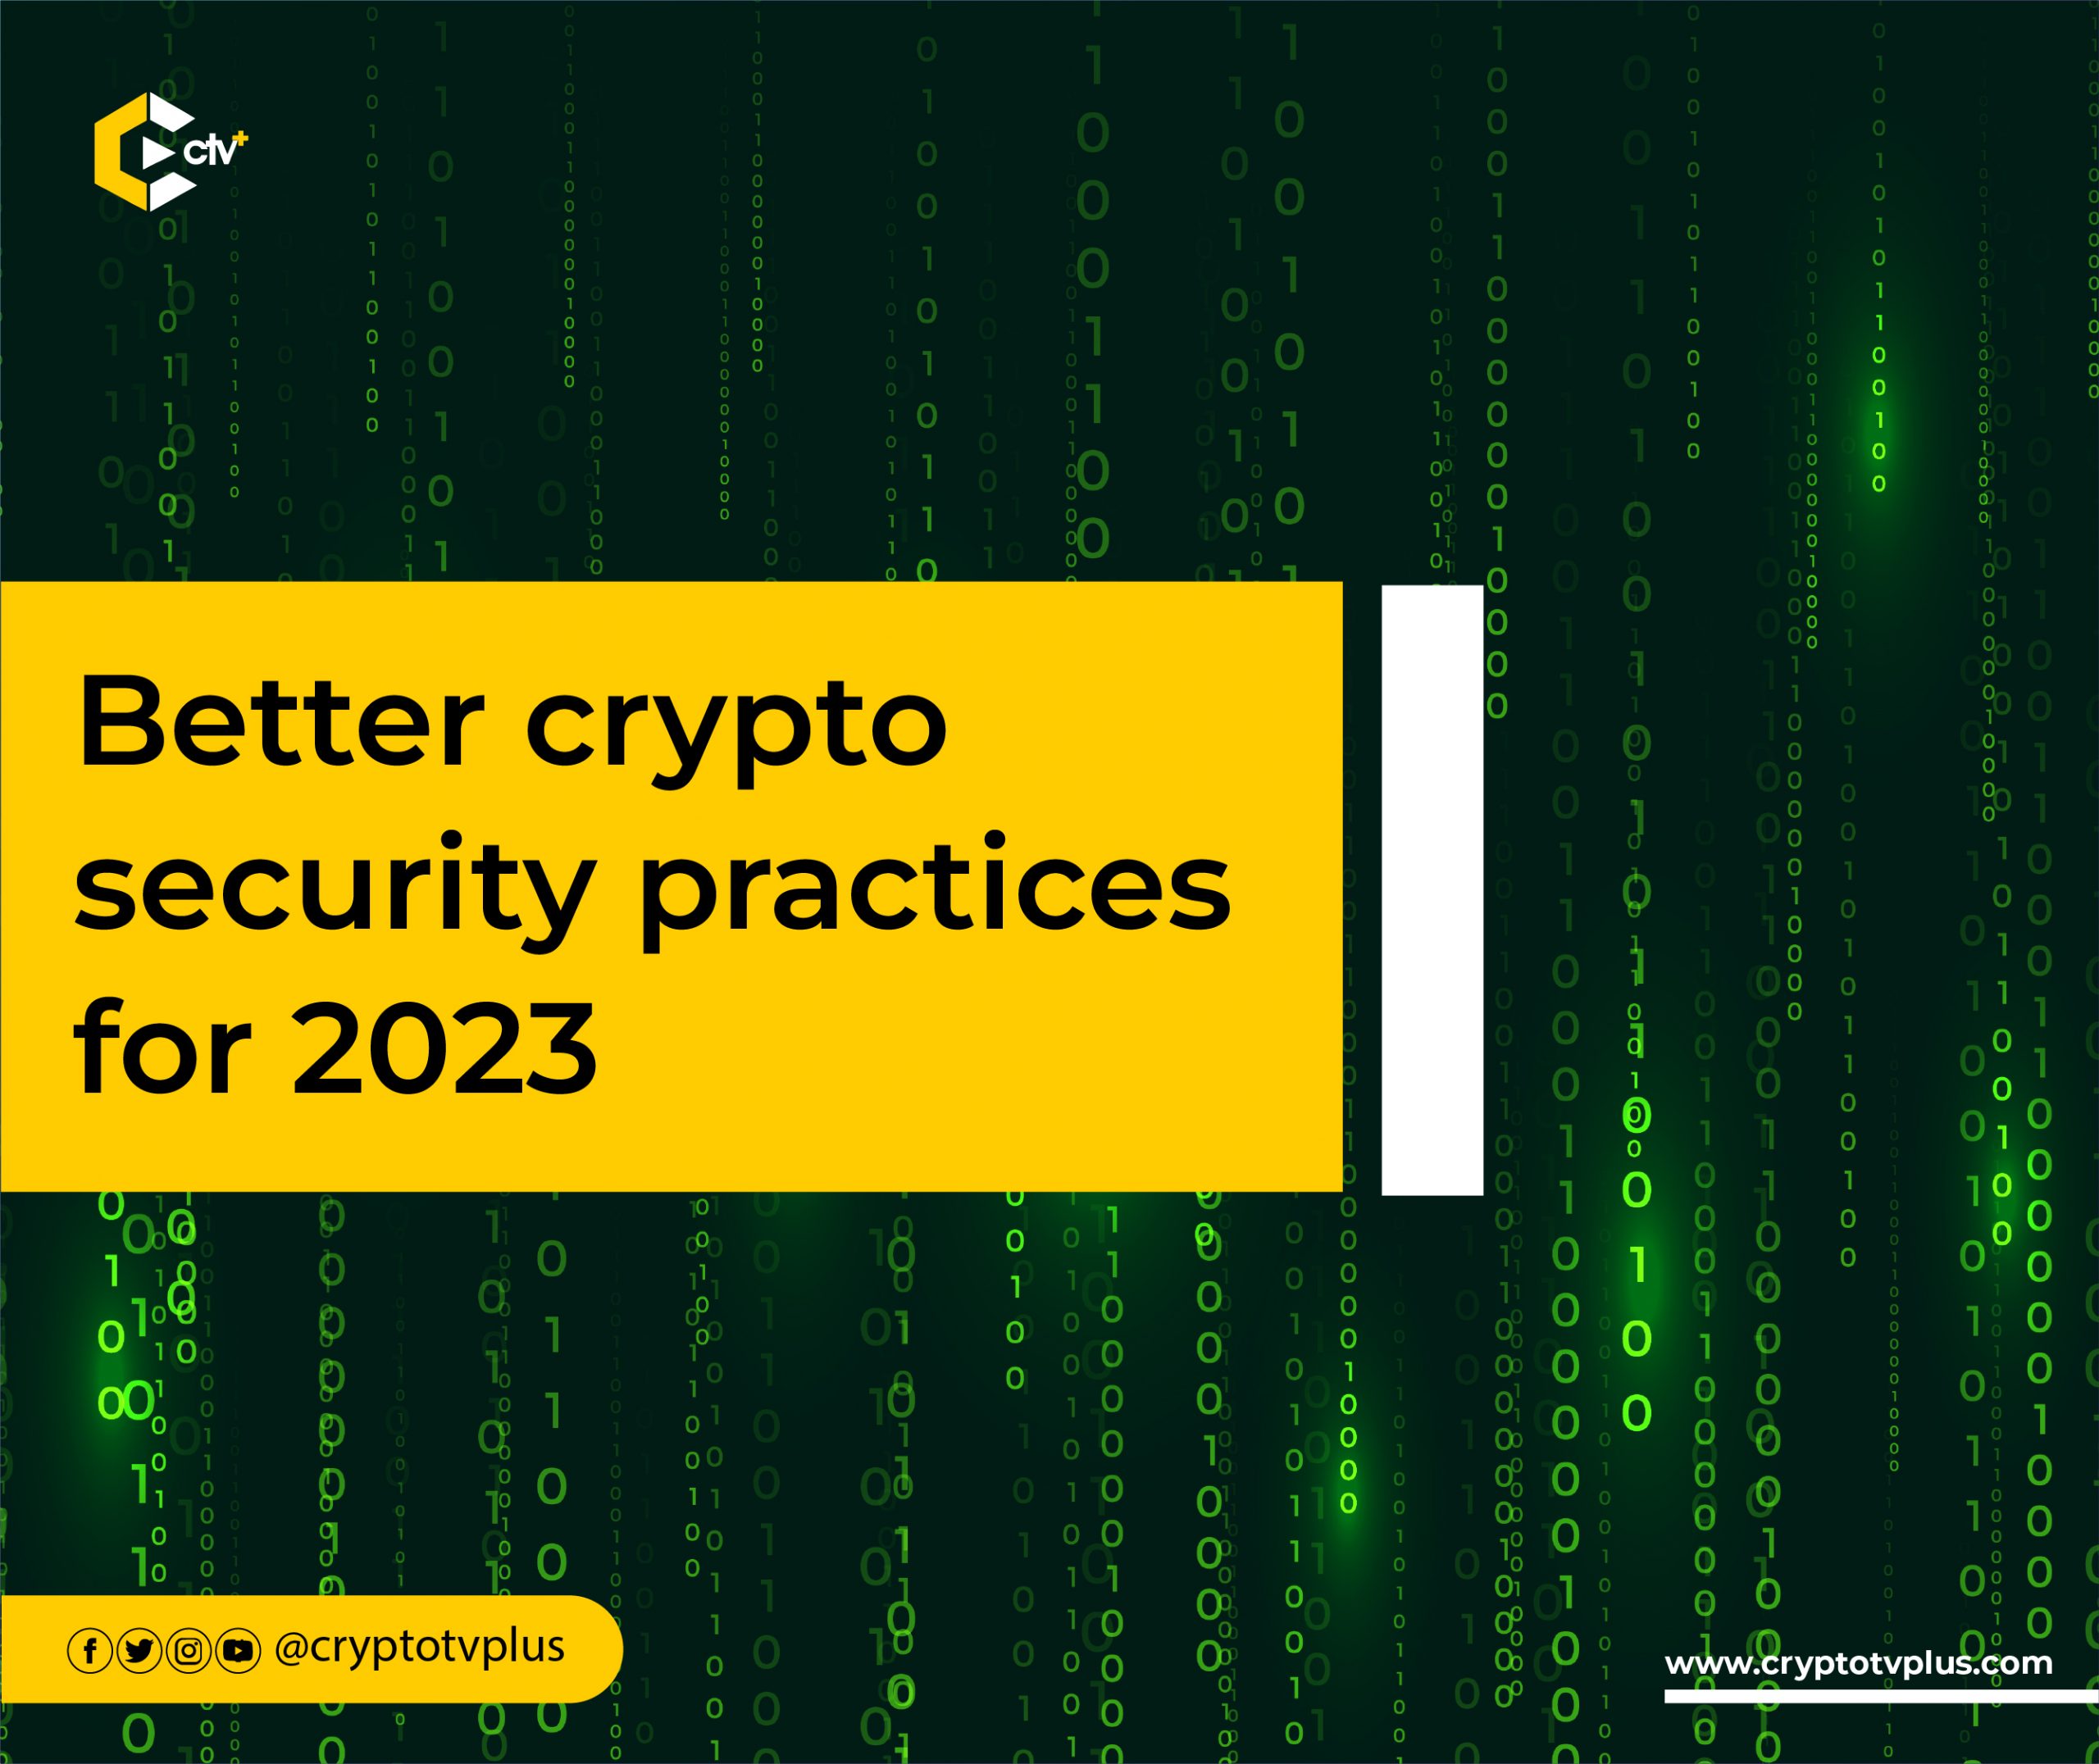 Better crypto security practices for 2023